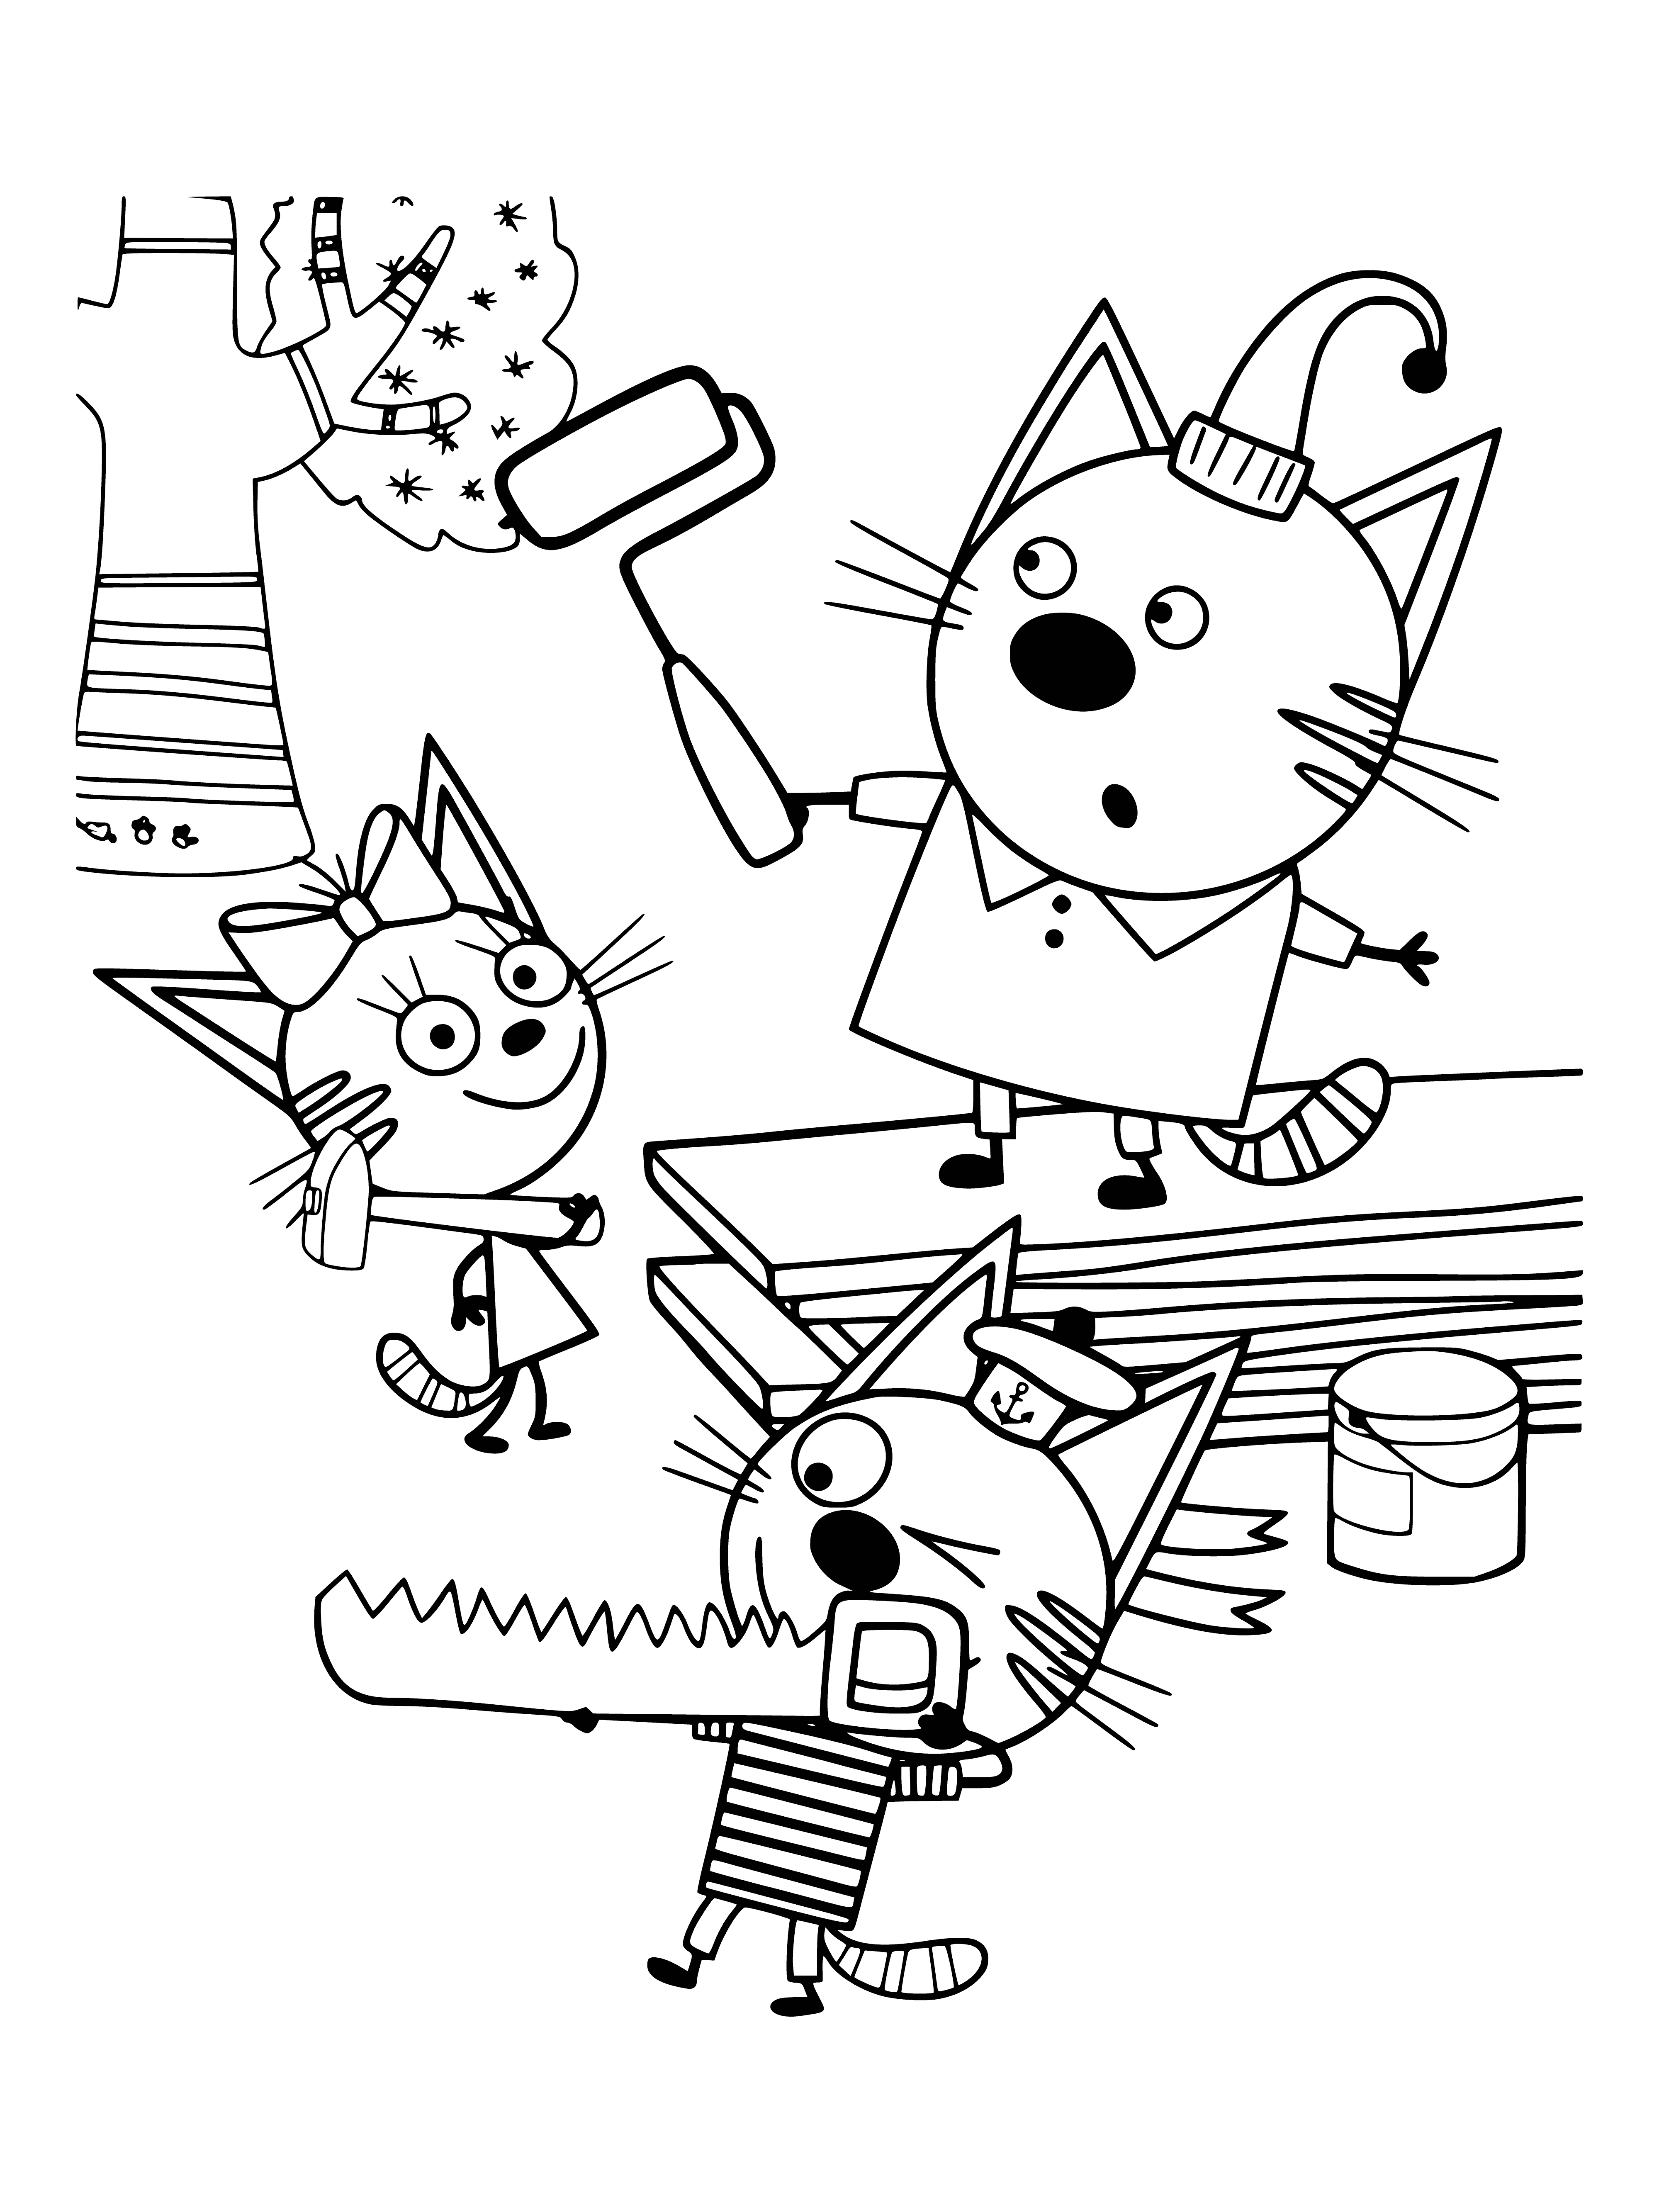 coloring page: 3 kittens on a coloring page trying to do repairs and having fun.